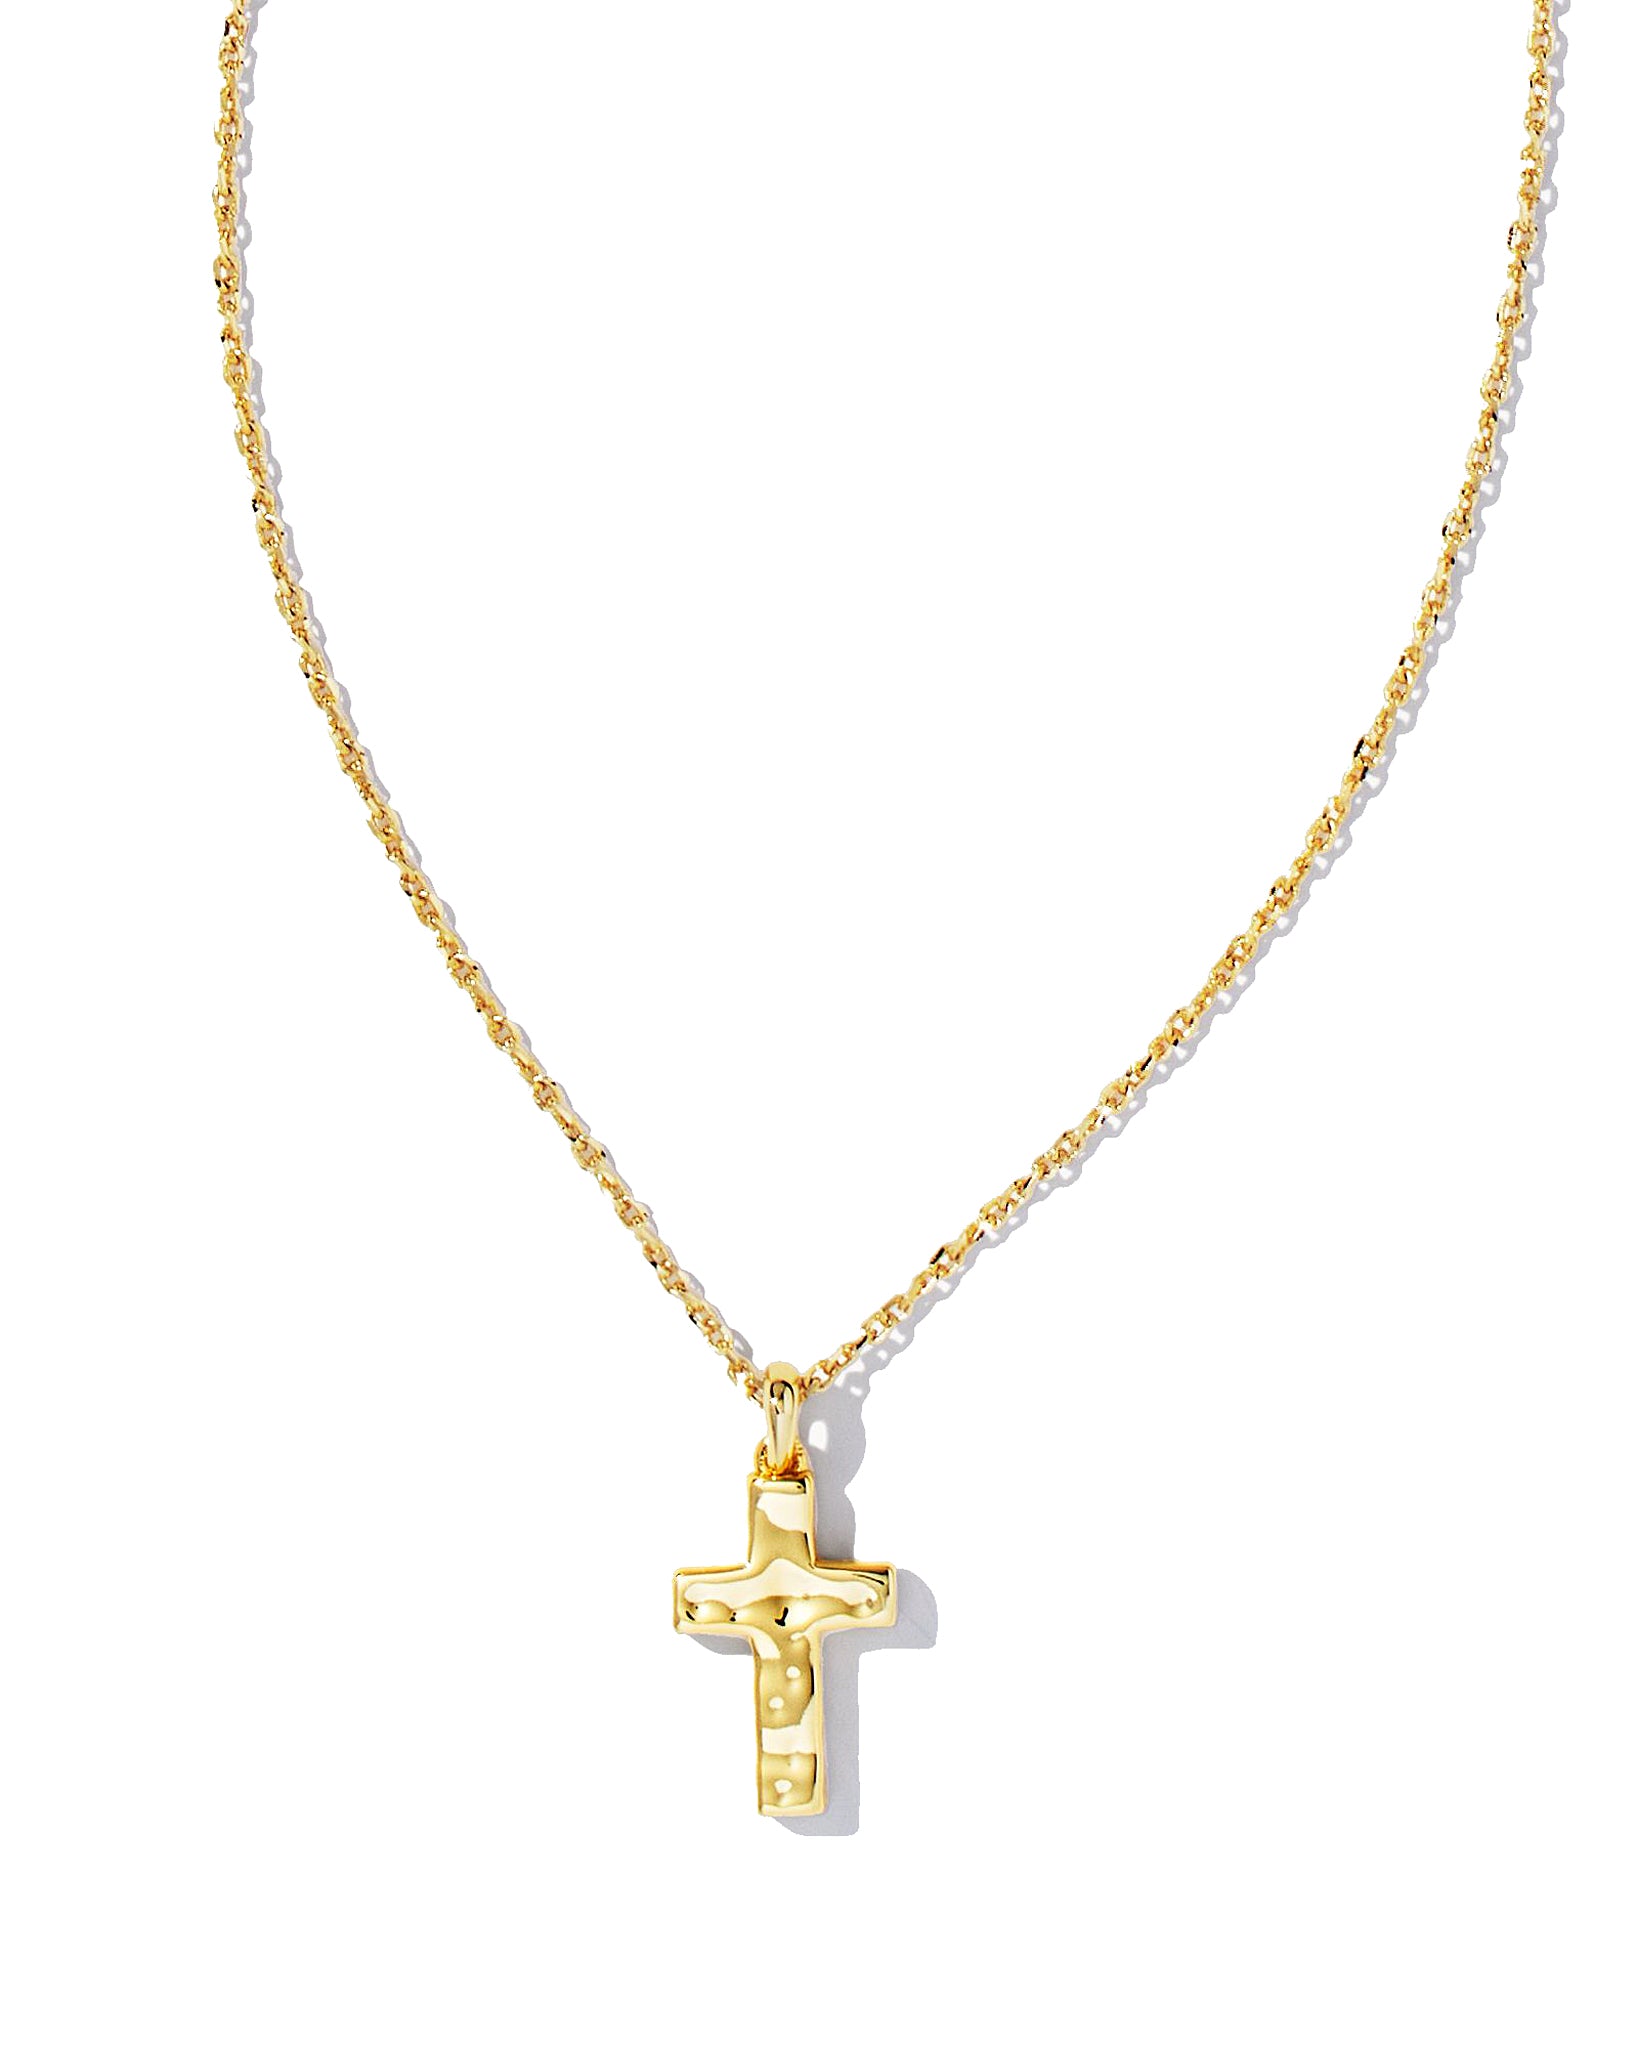 Kendra Scott Cross Pendant Necklace in Hammered Gold Plated